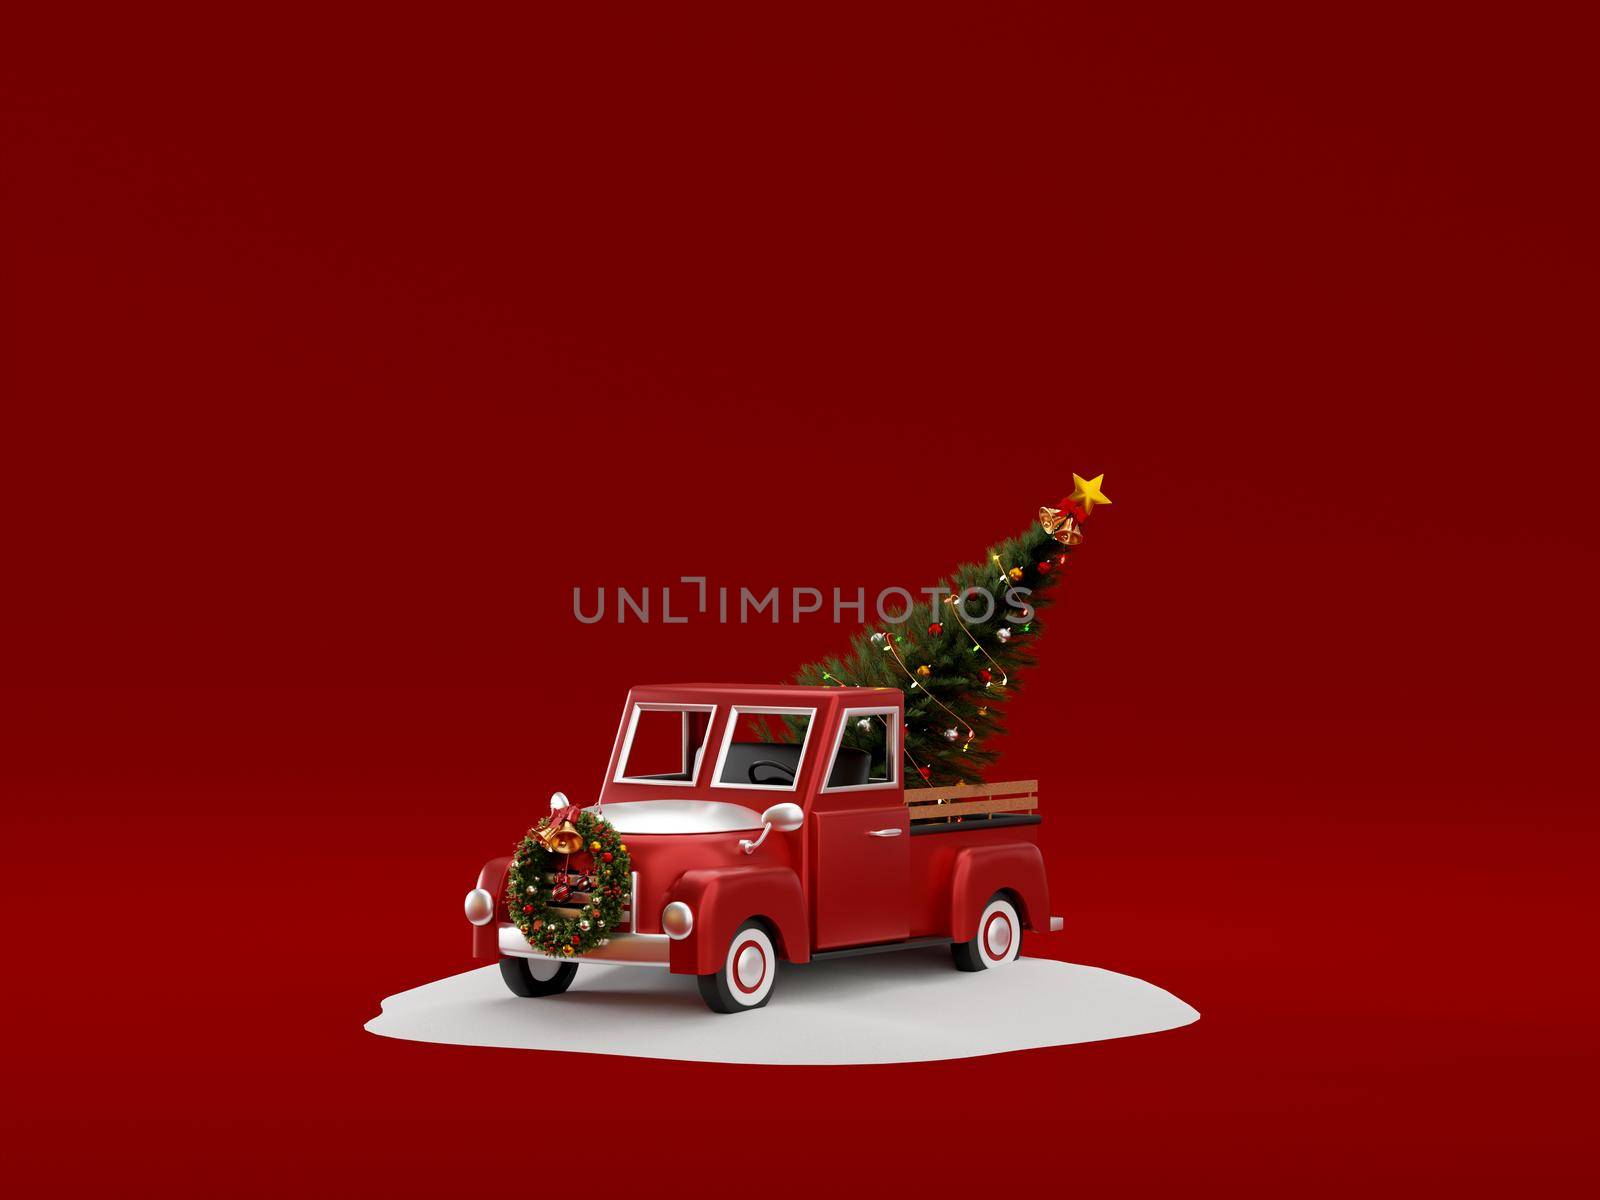 3d illustration of red Christmas truck carry Christmas tree on snow ground by nutzchotwarut